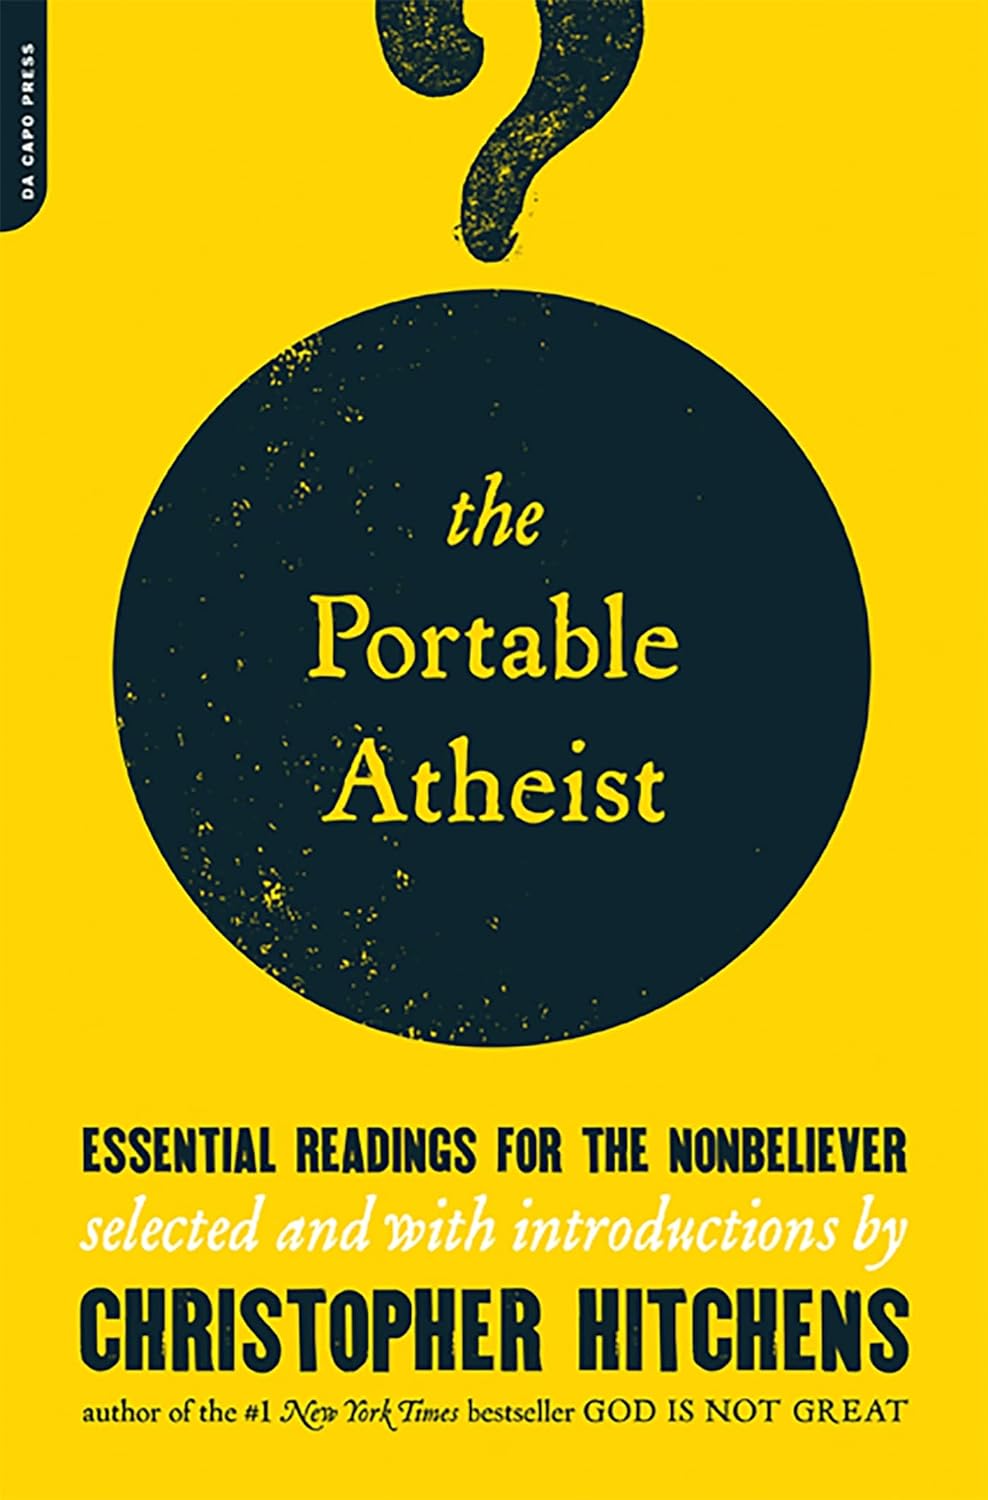 Livre ISBN  The Portable Atheist (Christopher Hitchens)